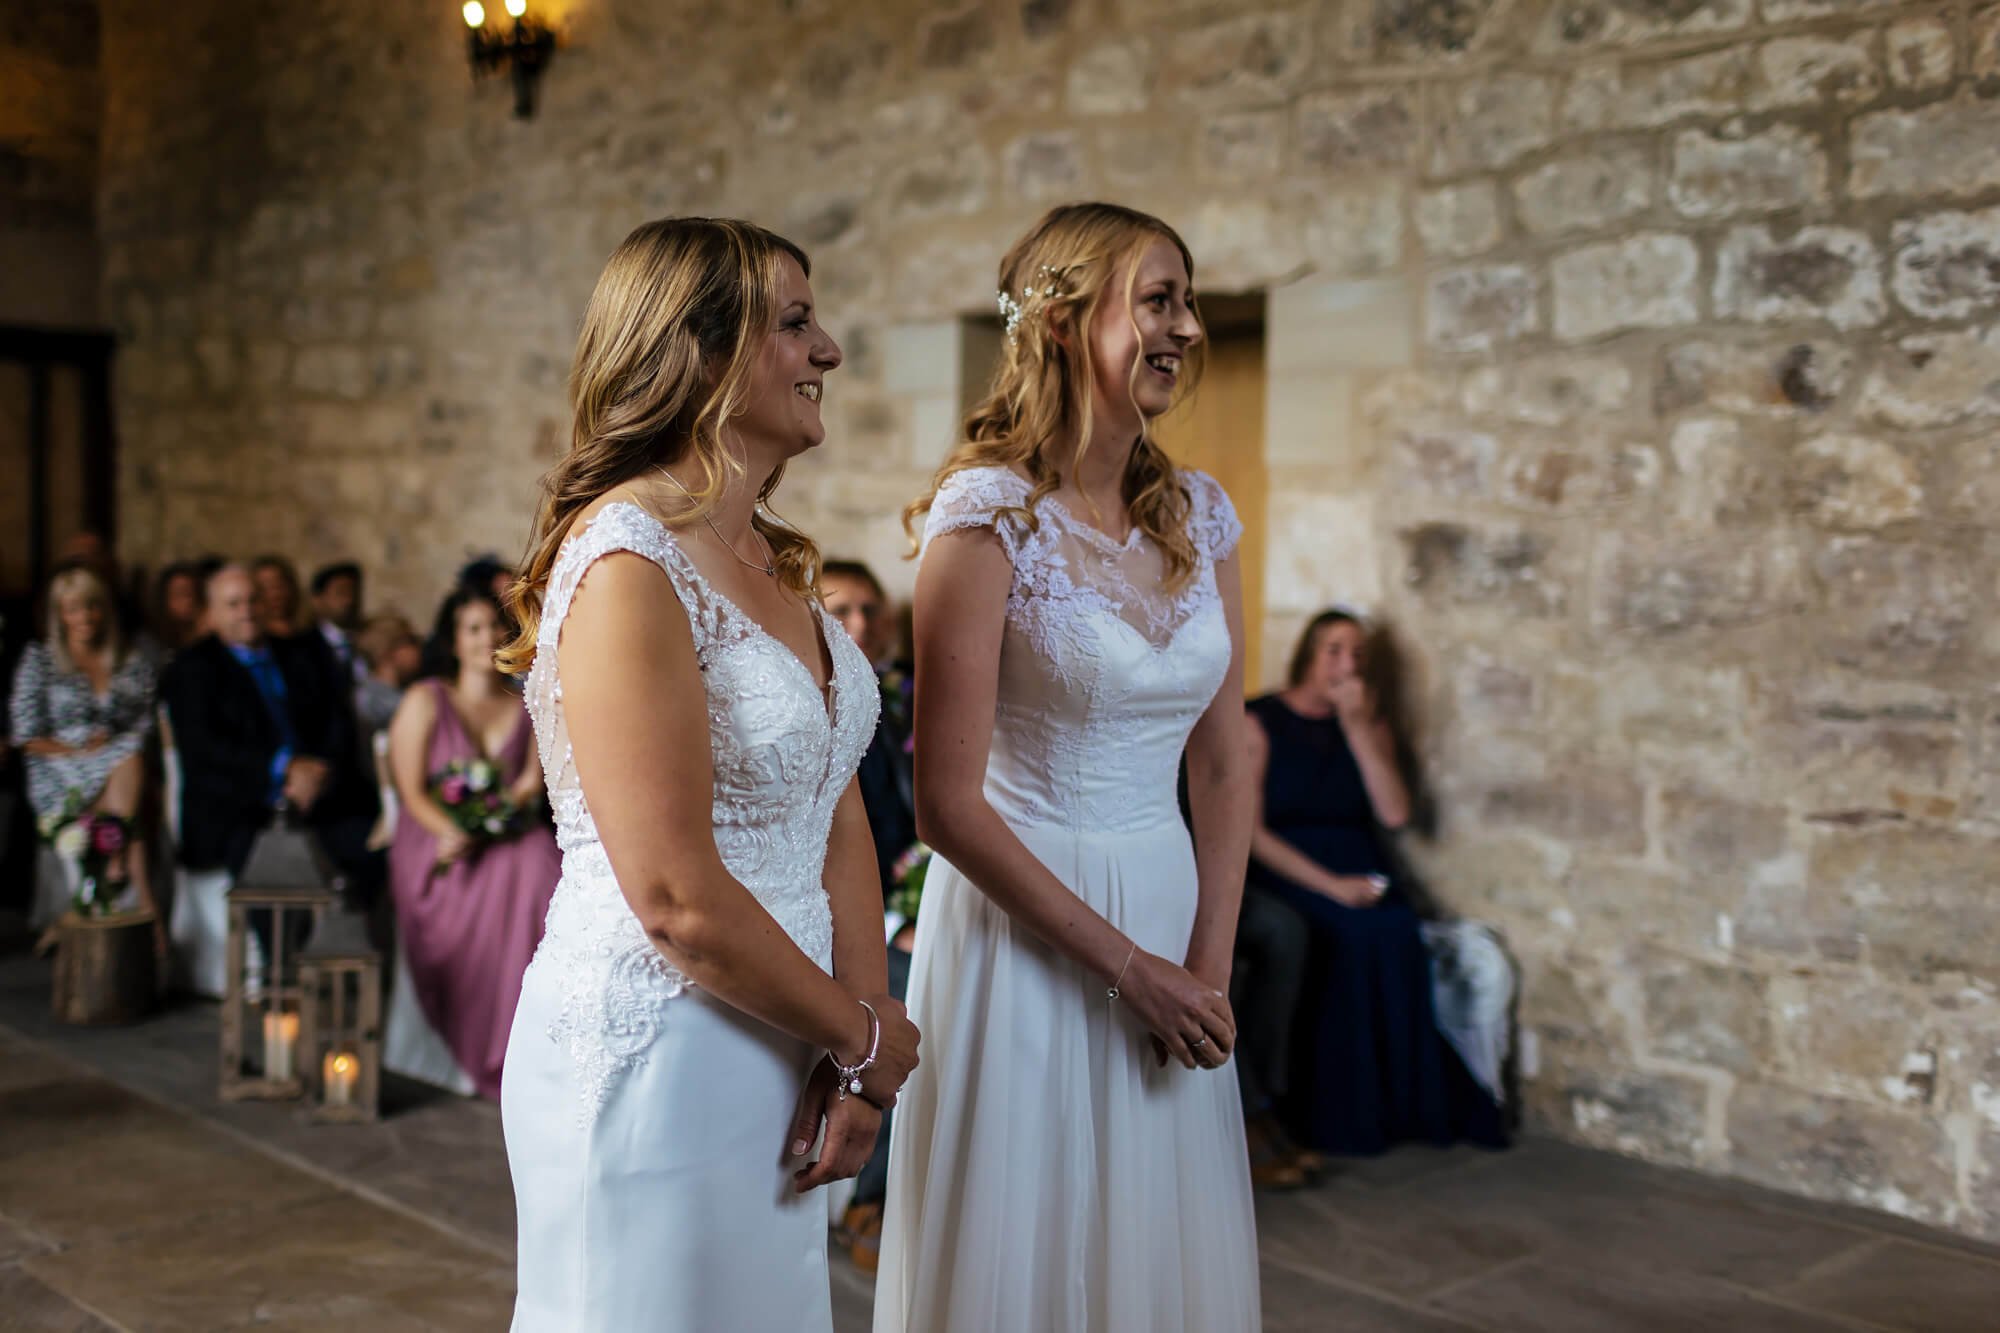 Two brides at their wedding ceremony in Yorkshire